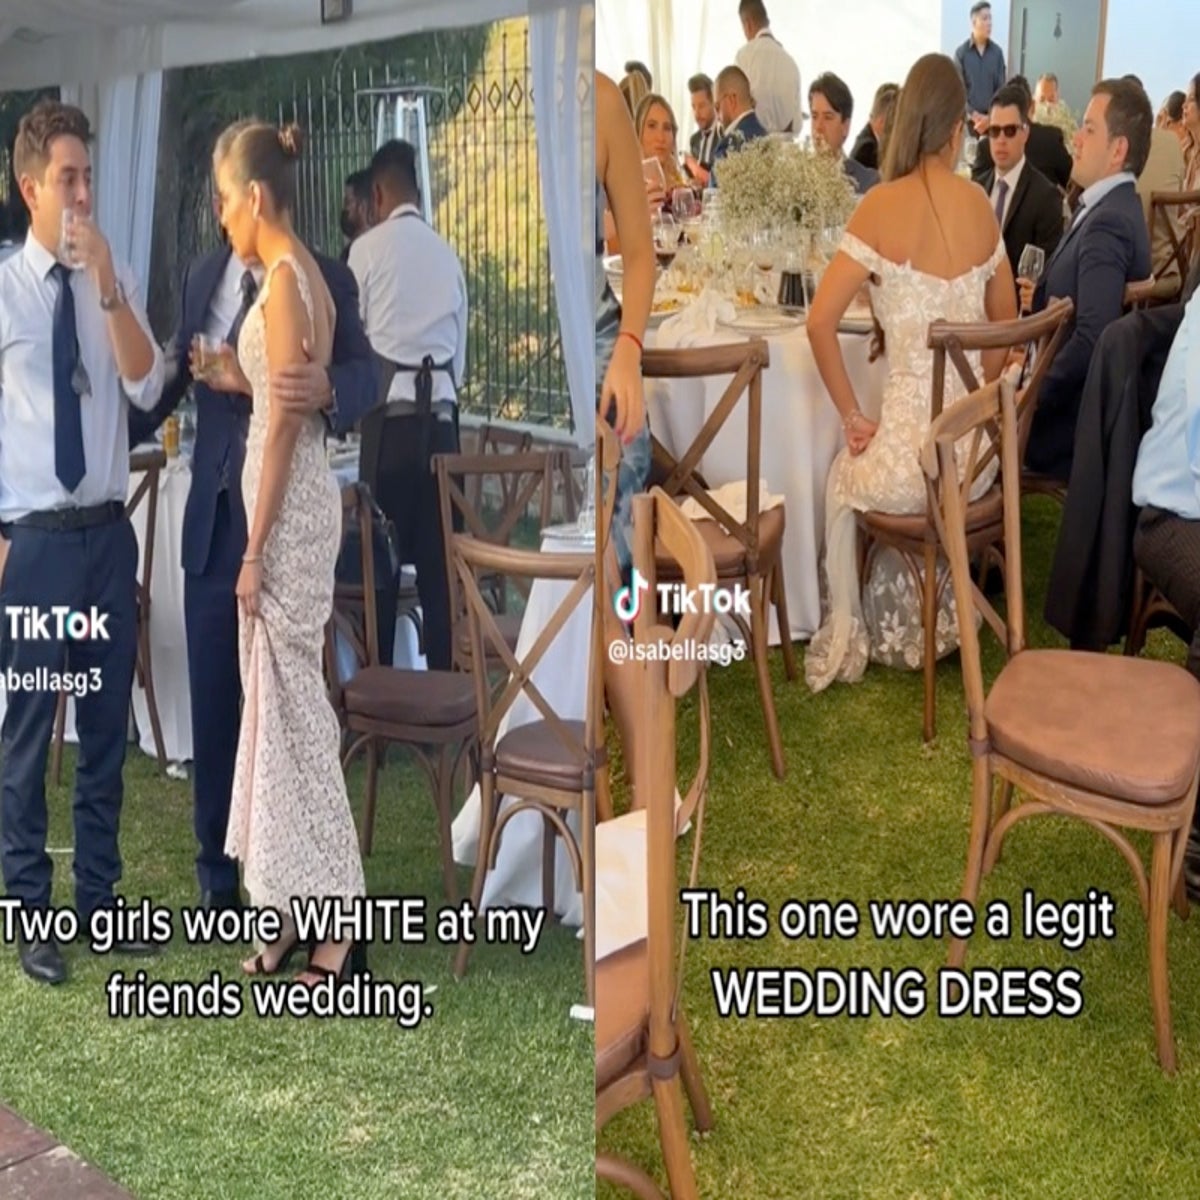 unique wedding guest look I was proud of! shockingly, this followed the  dress code. 😂 : r/Weddingattireapproval